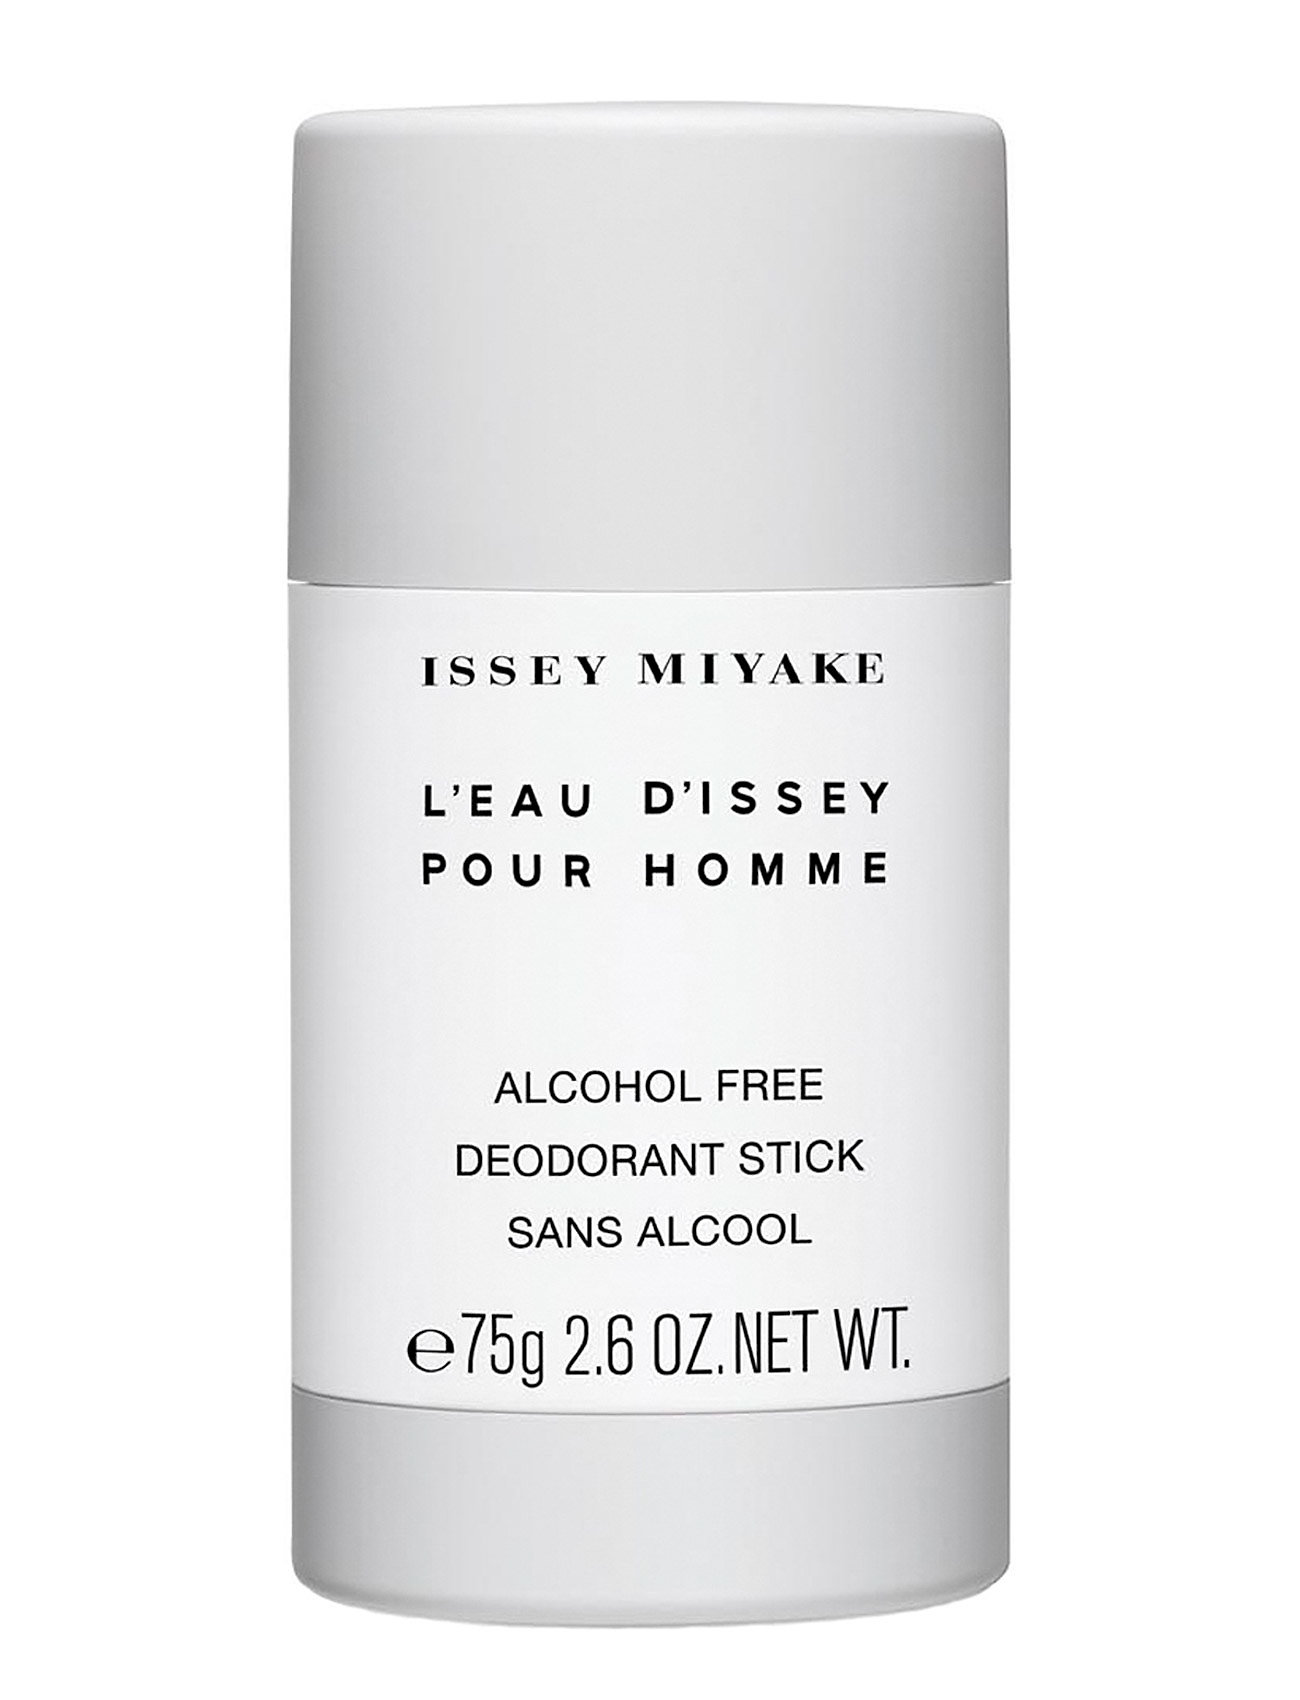 Issey Miyake L'eau D'issey Pour Homme Deo Stick Alcohol Free Beauty Men Deodorants Sticks Nude Issey Miyake